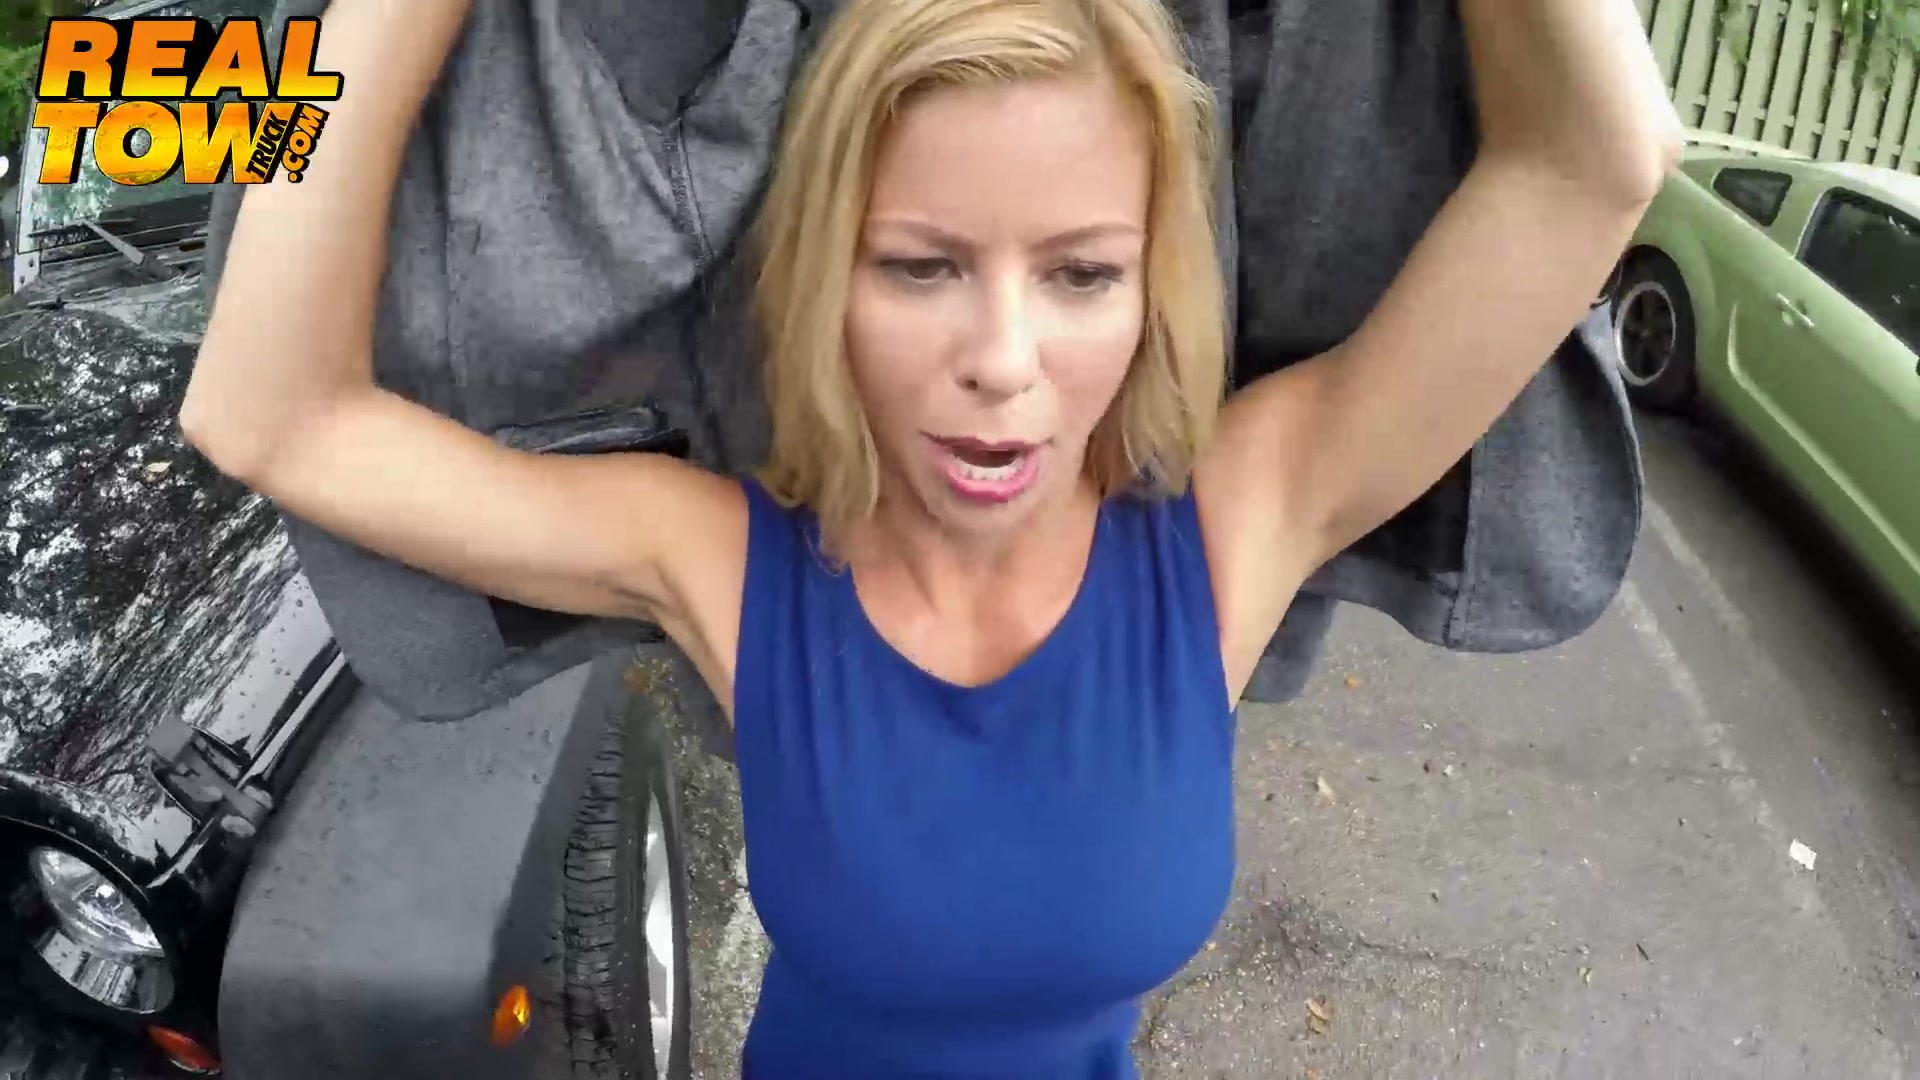 Alexis Fawx Bad Tow Truck